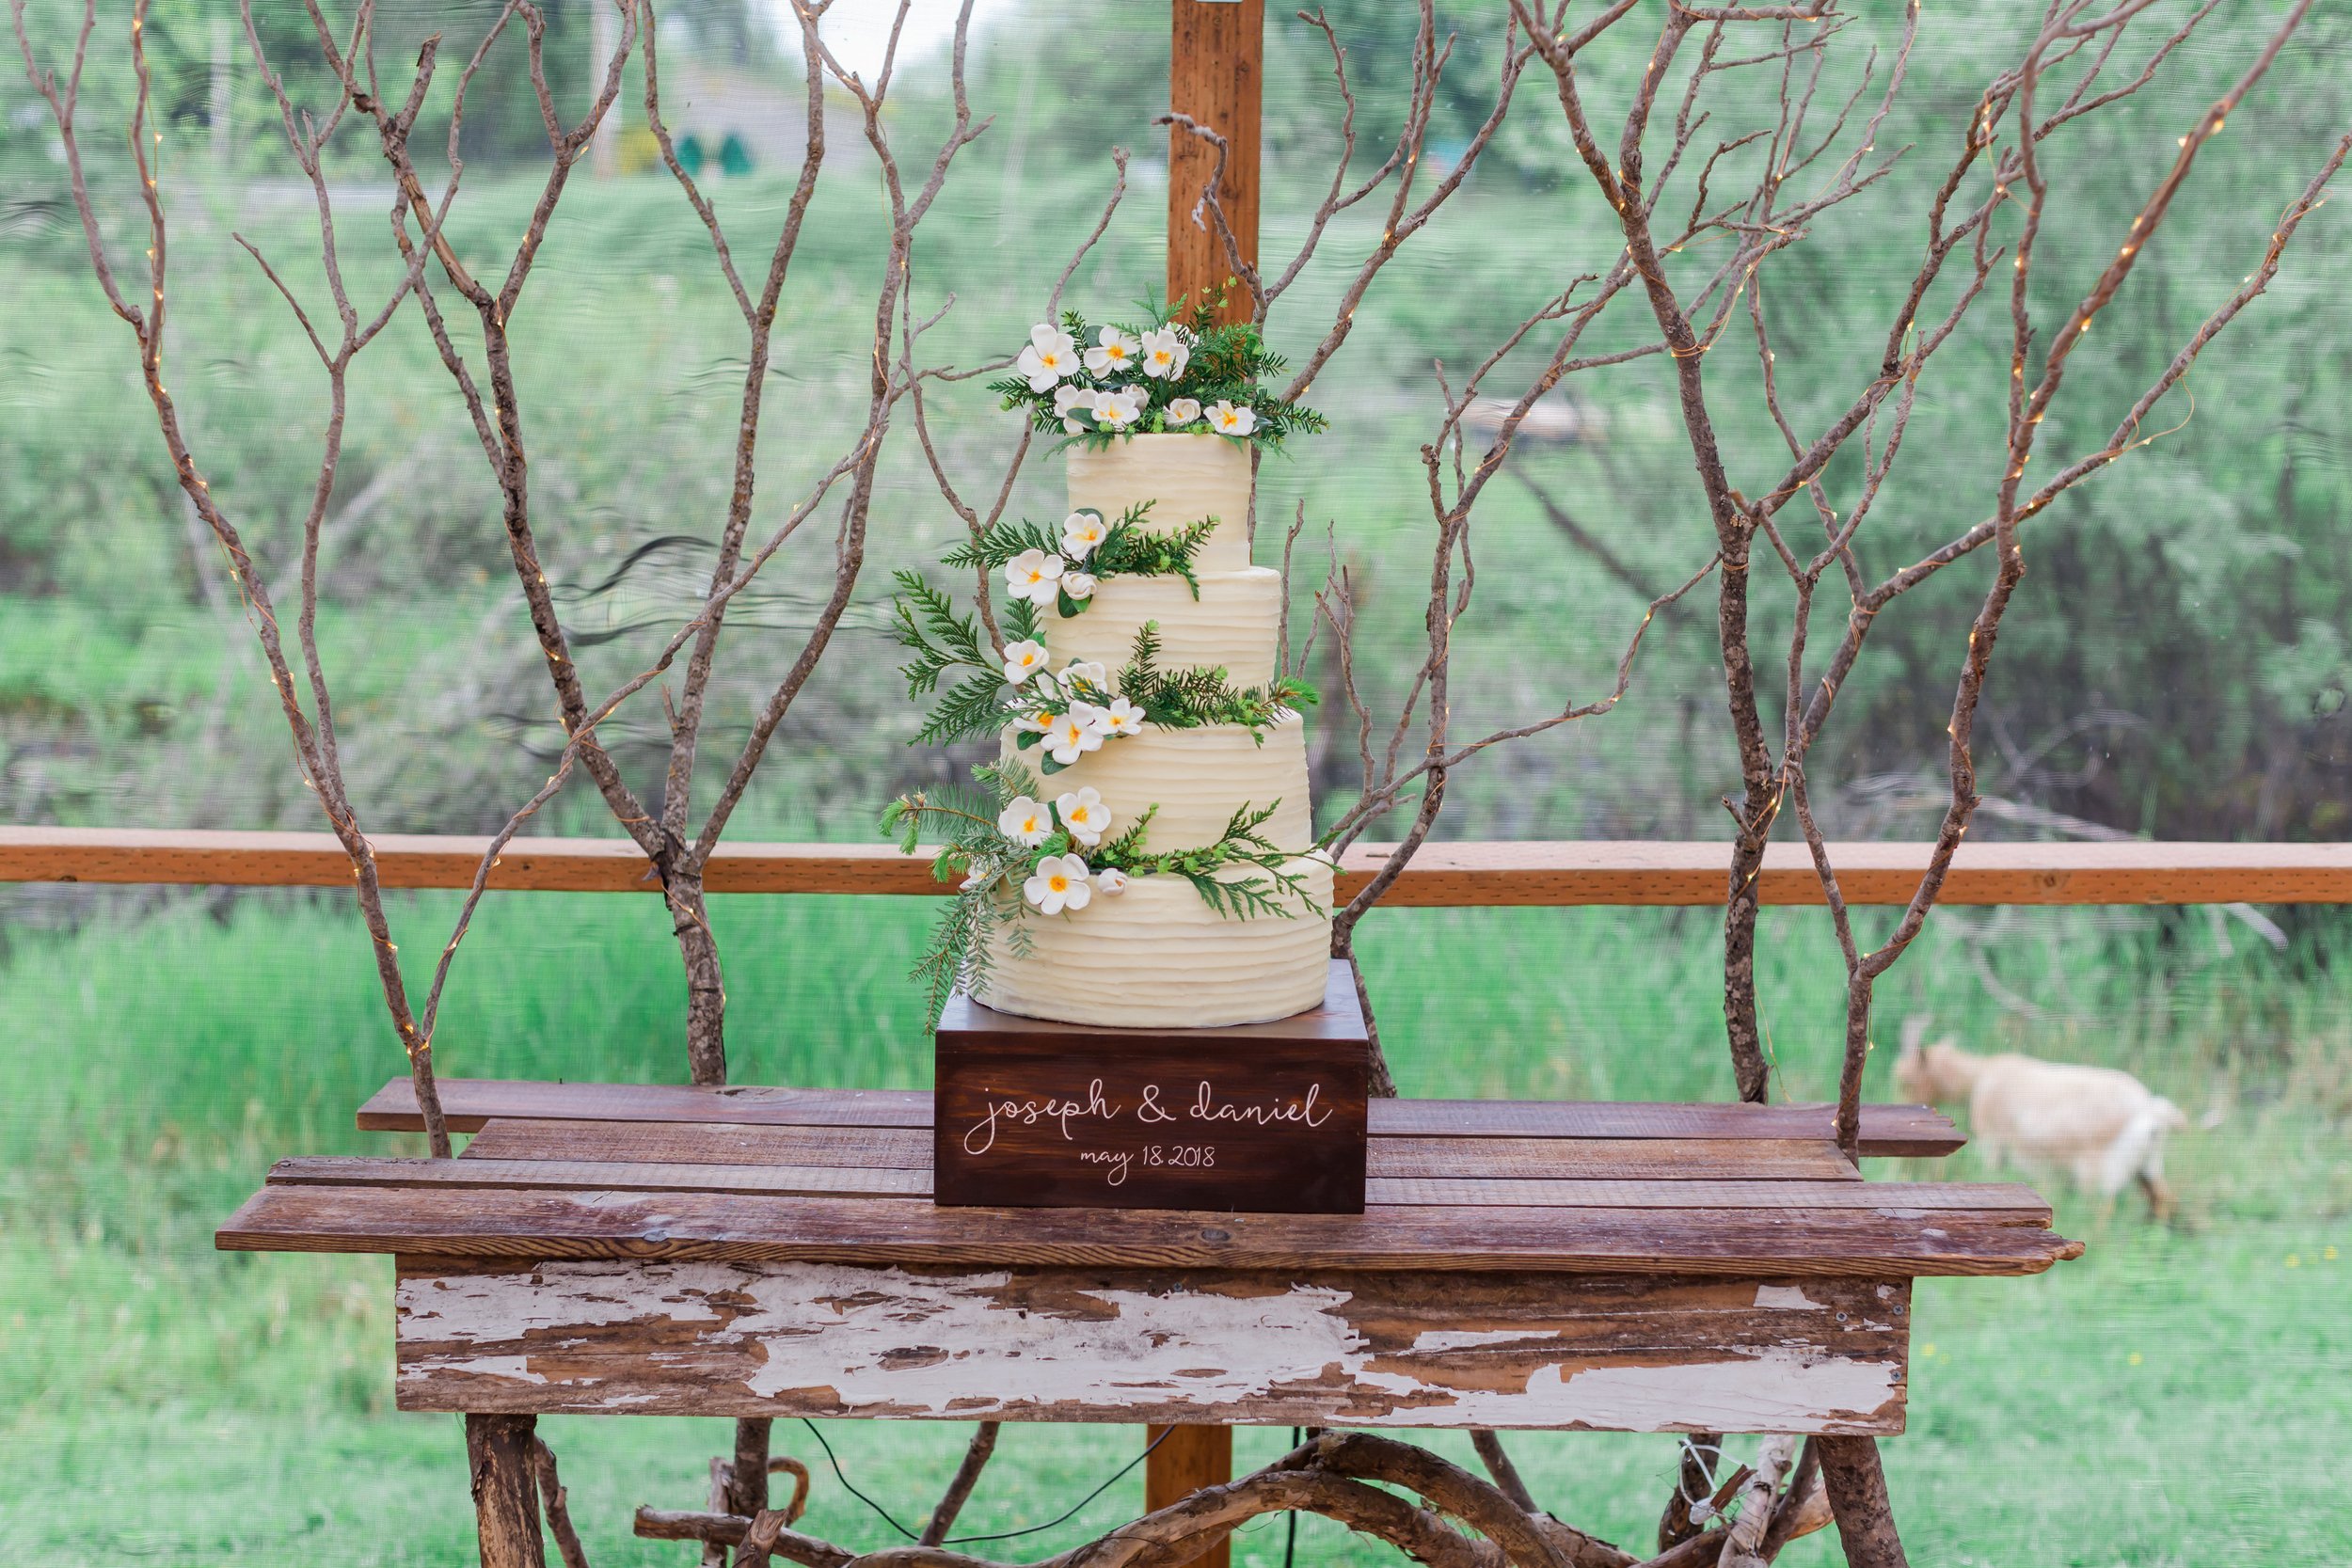  A wedding cake decorated with greenery and white flowers sits atop a cake stand that reads “Joseph &amp; Daniel, May 18, 2018” 